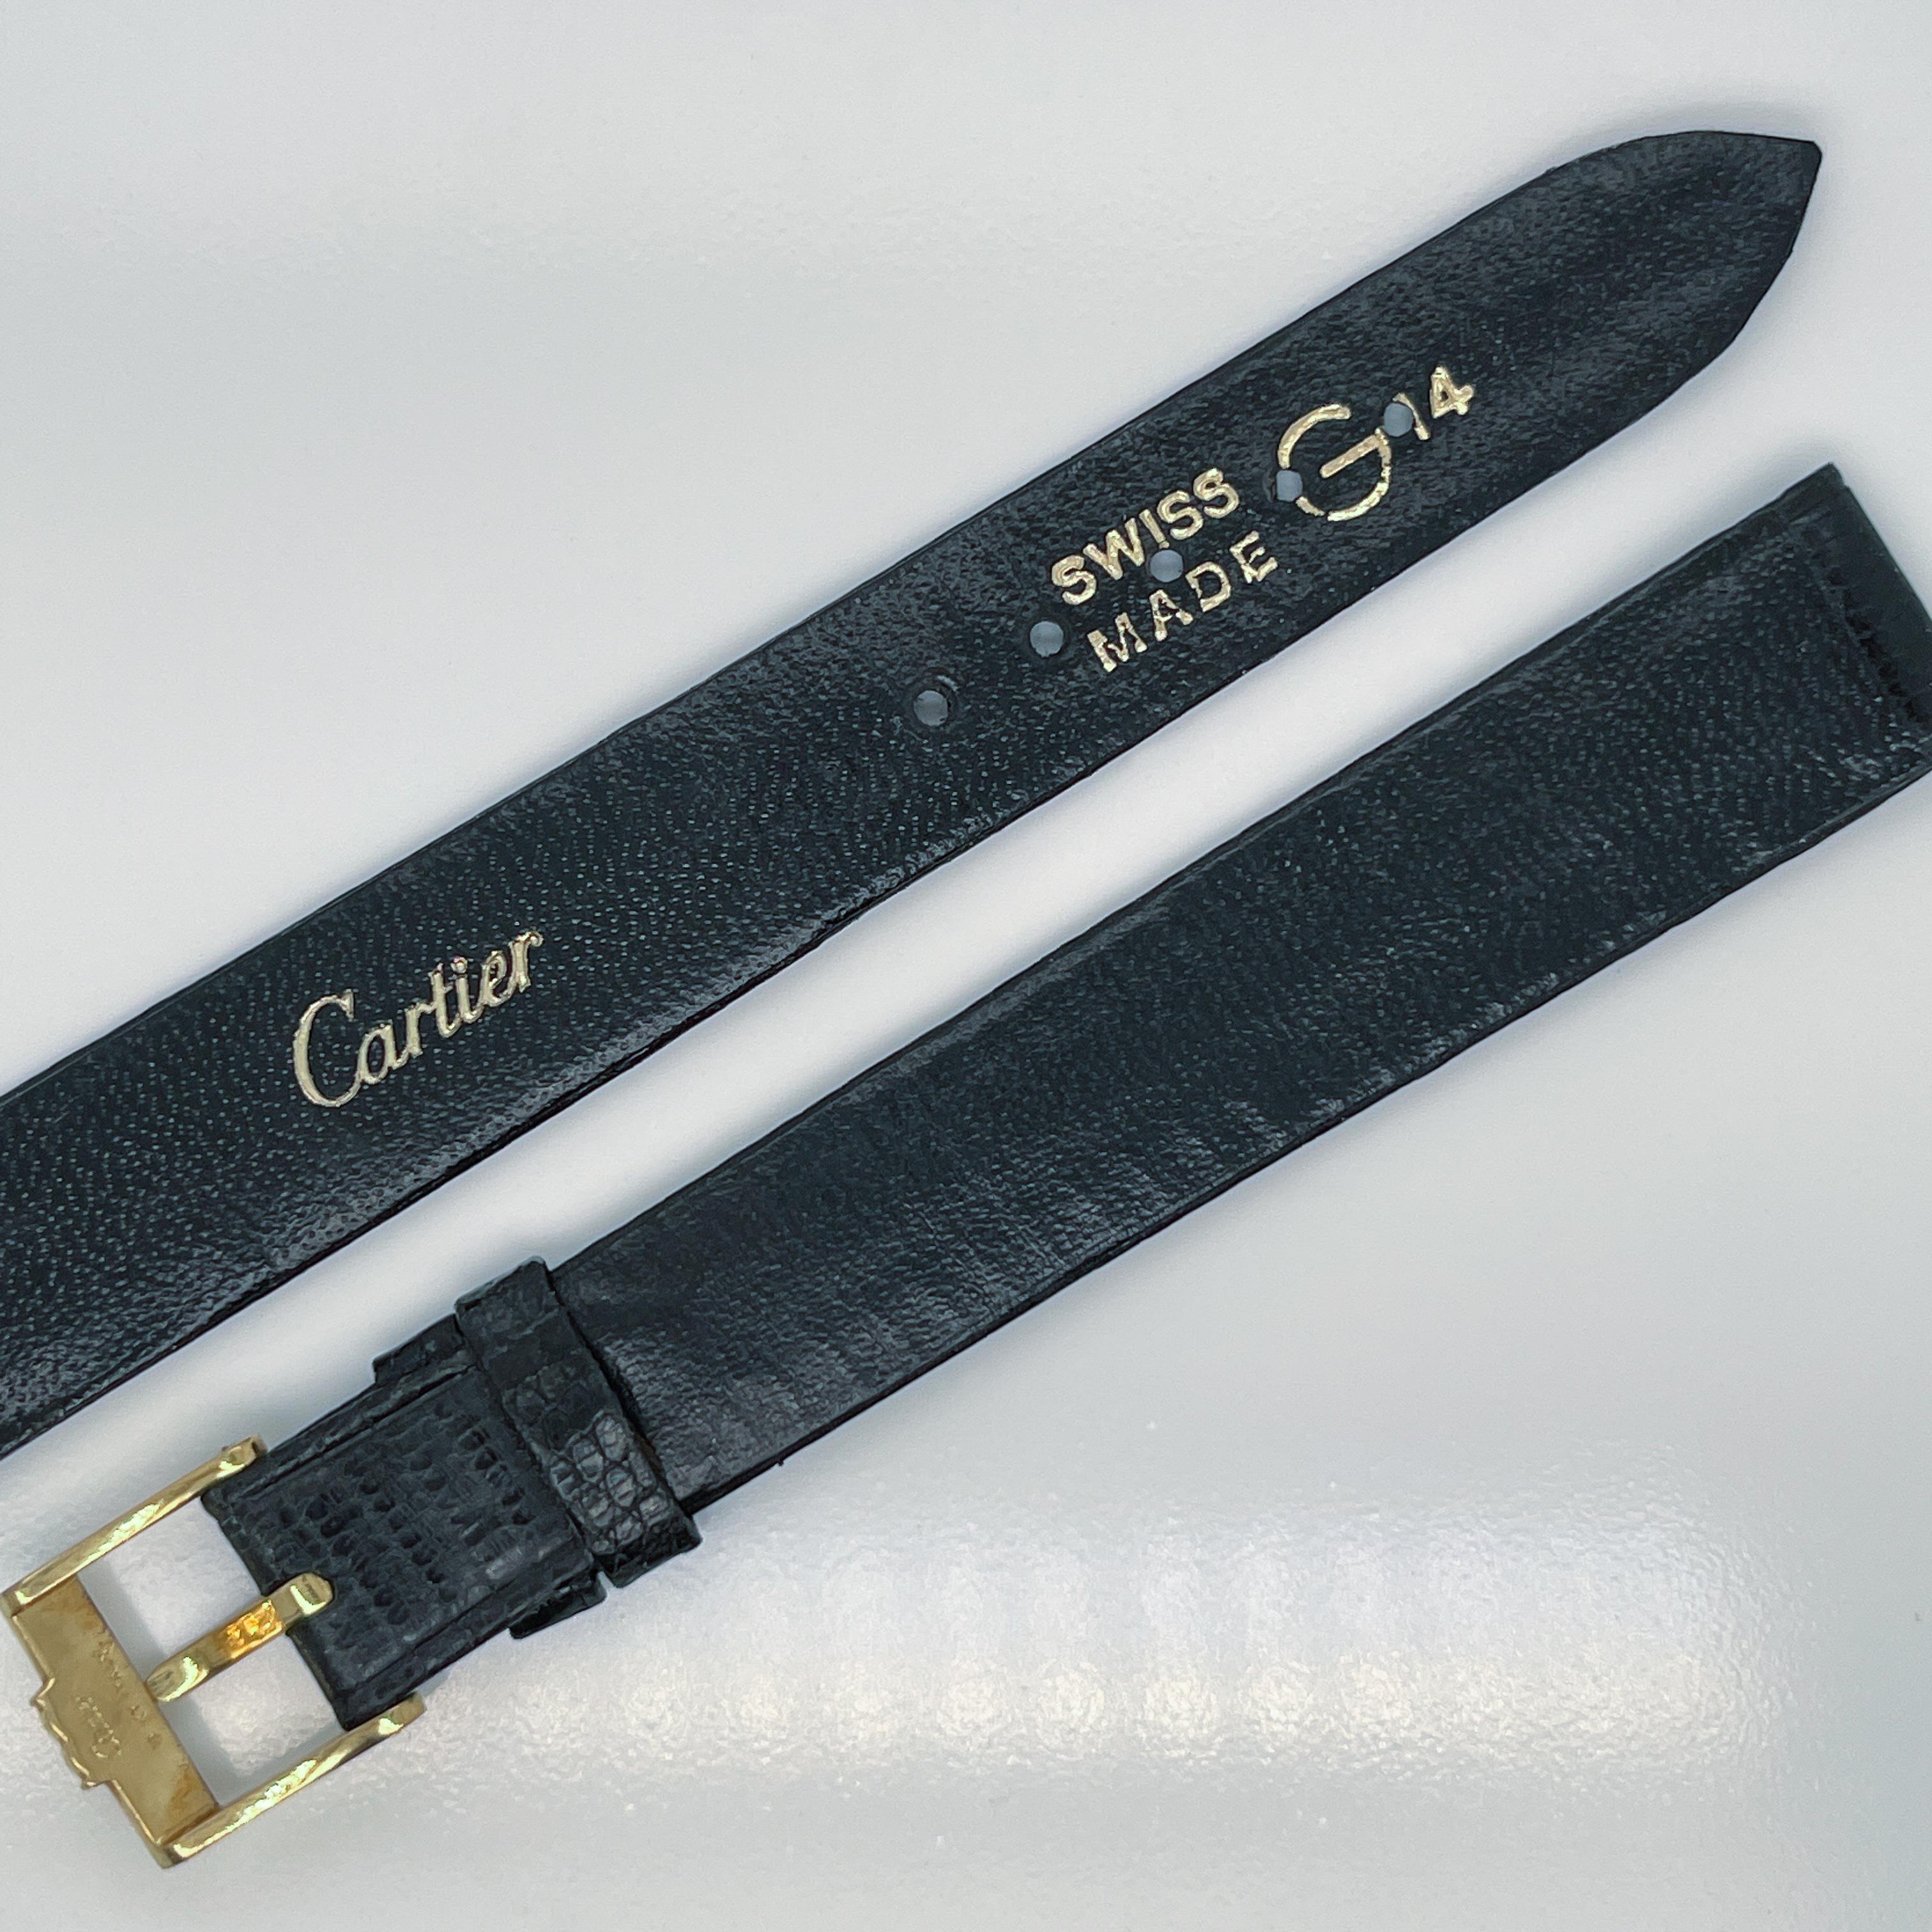 Vintage Unused Cartier 18 Karat Gold & 14mm Leather Wrist Watch Band In Good Condition For Sale In Philadelphia, PA